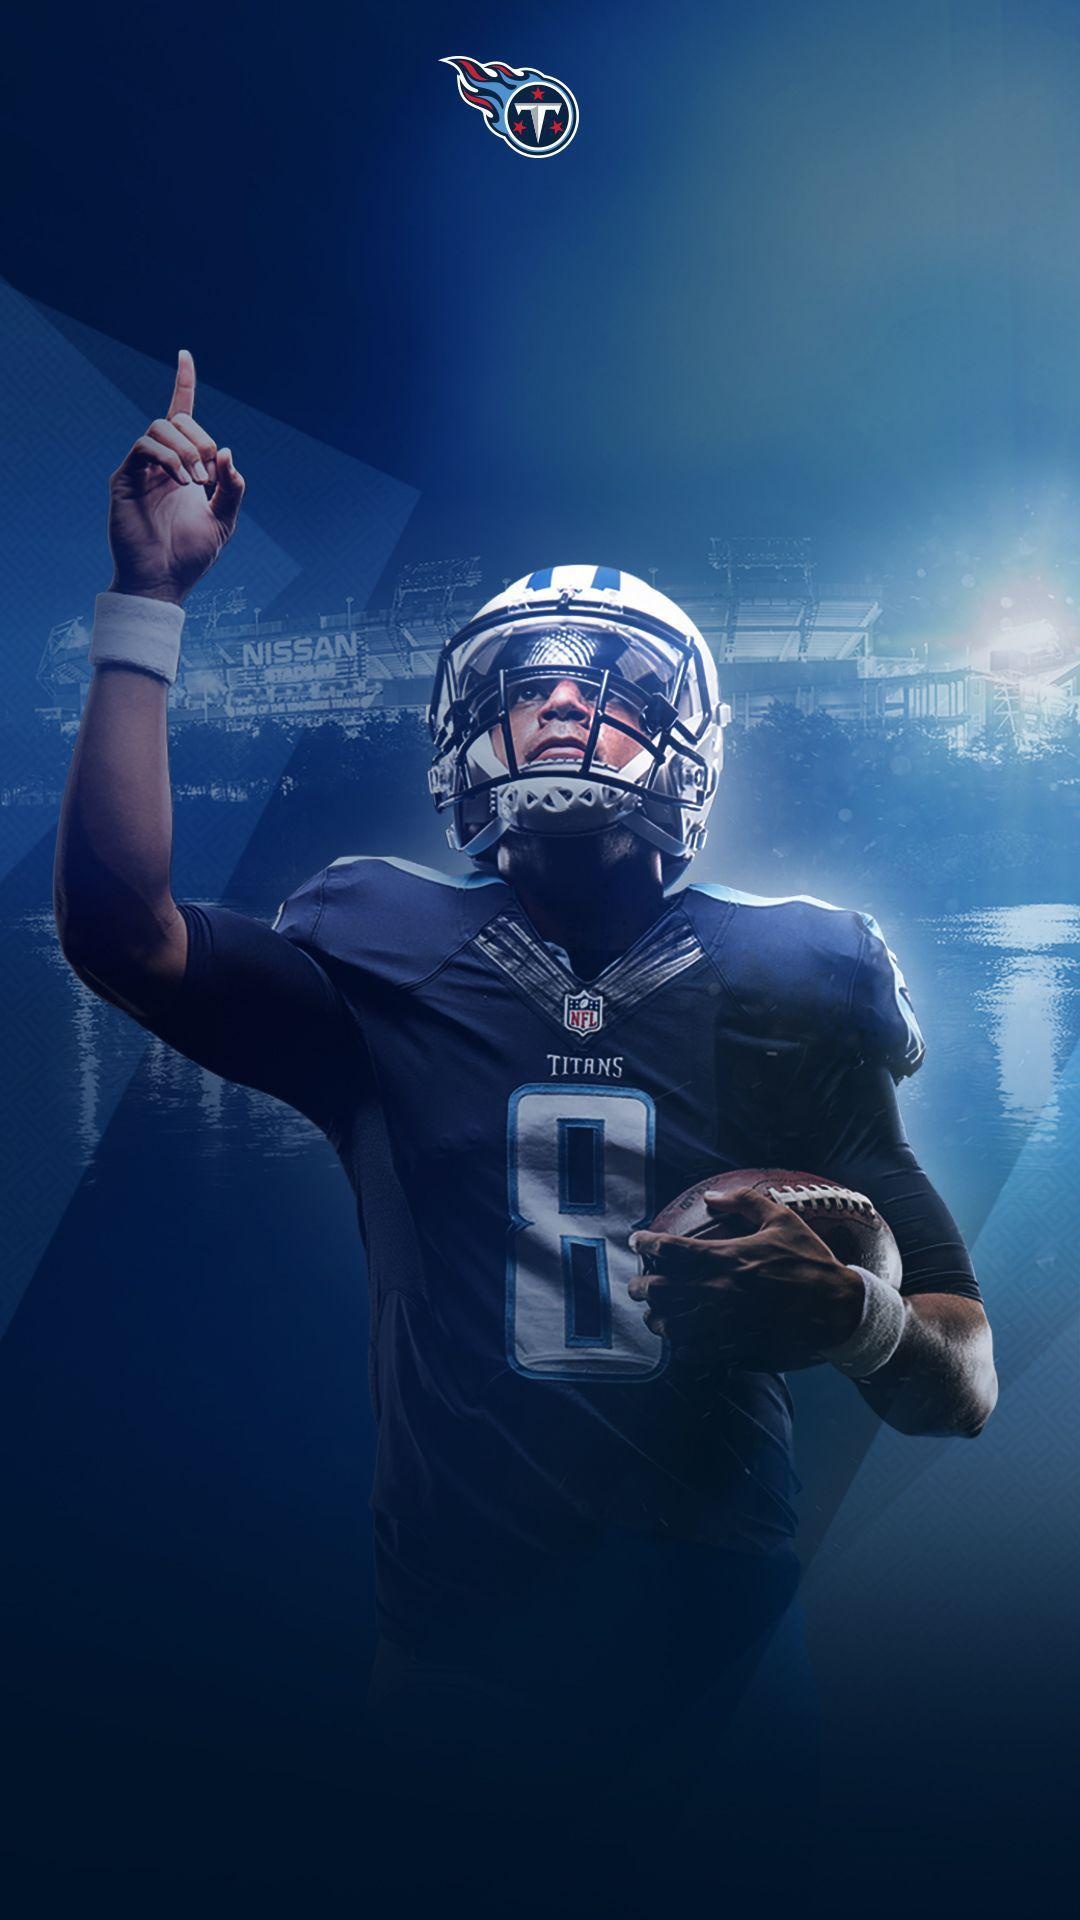 American Football: NFL, Tennessee Titans, The quarterback is the leader of the offense. 1080x1920 Full HD Background.